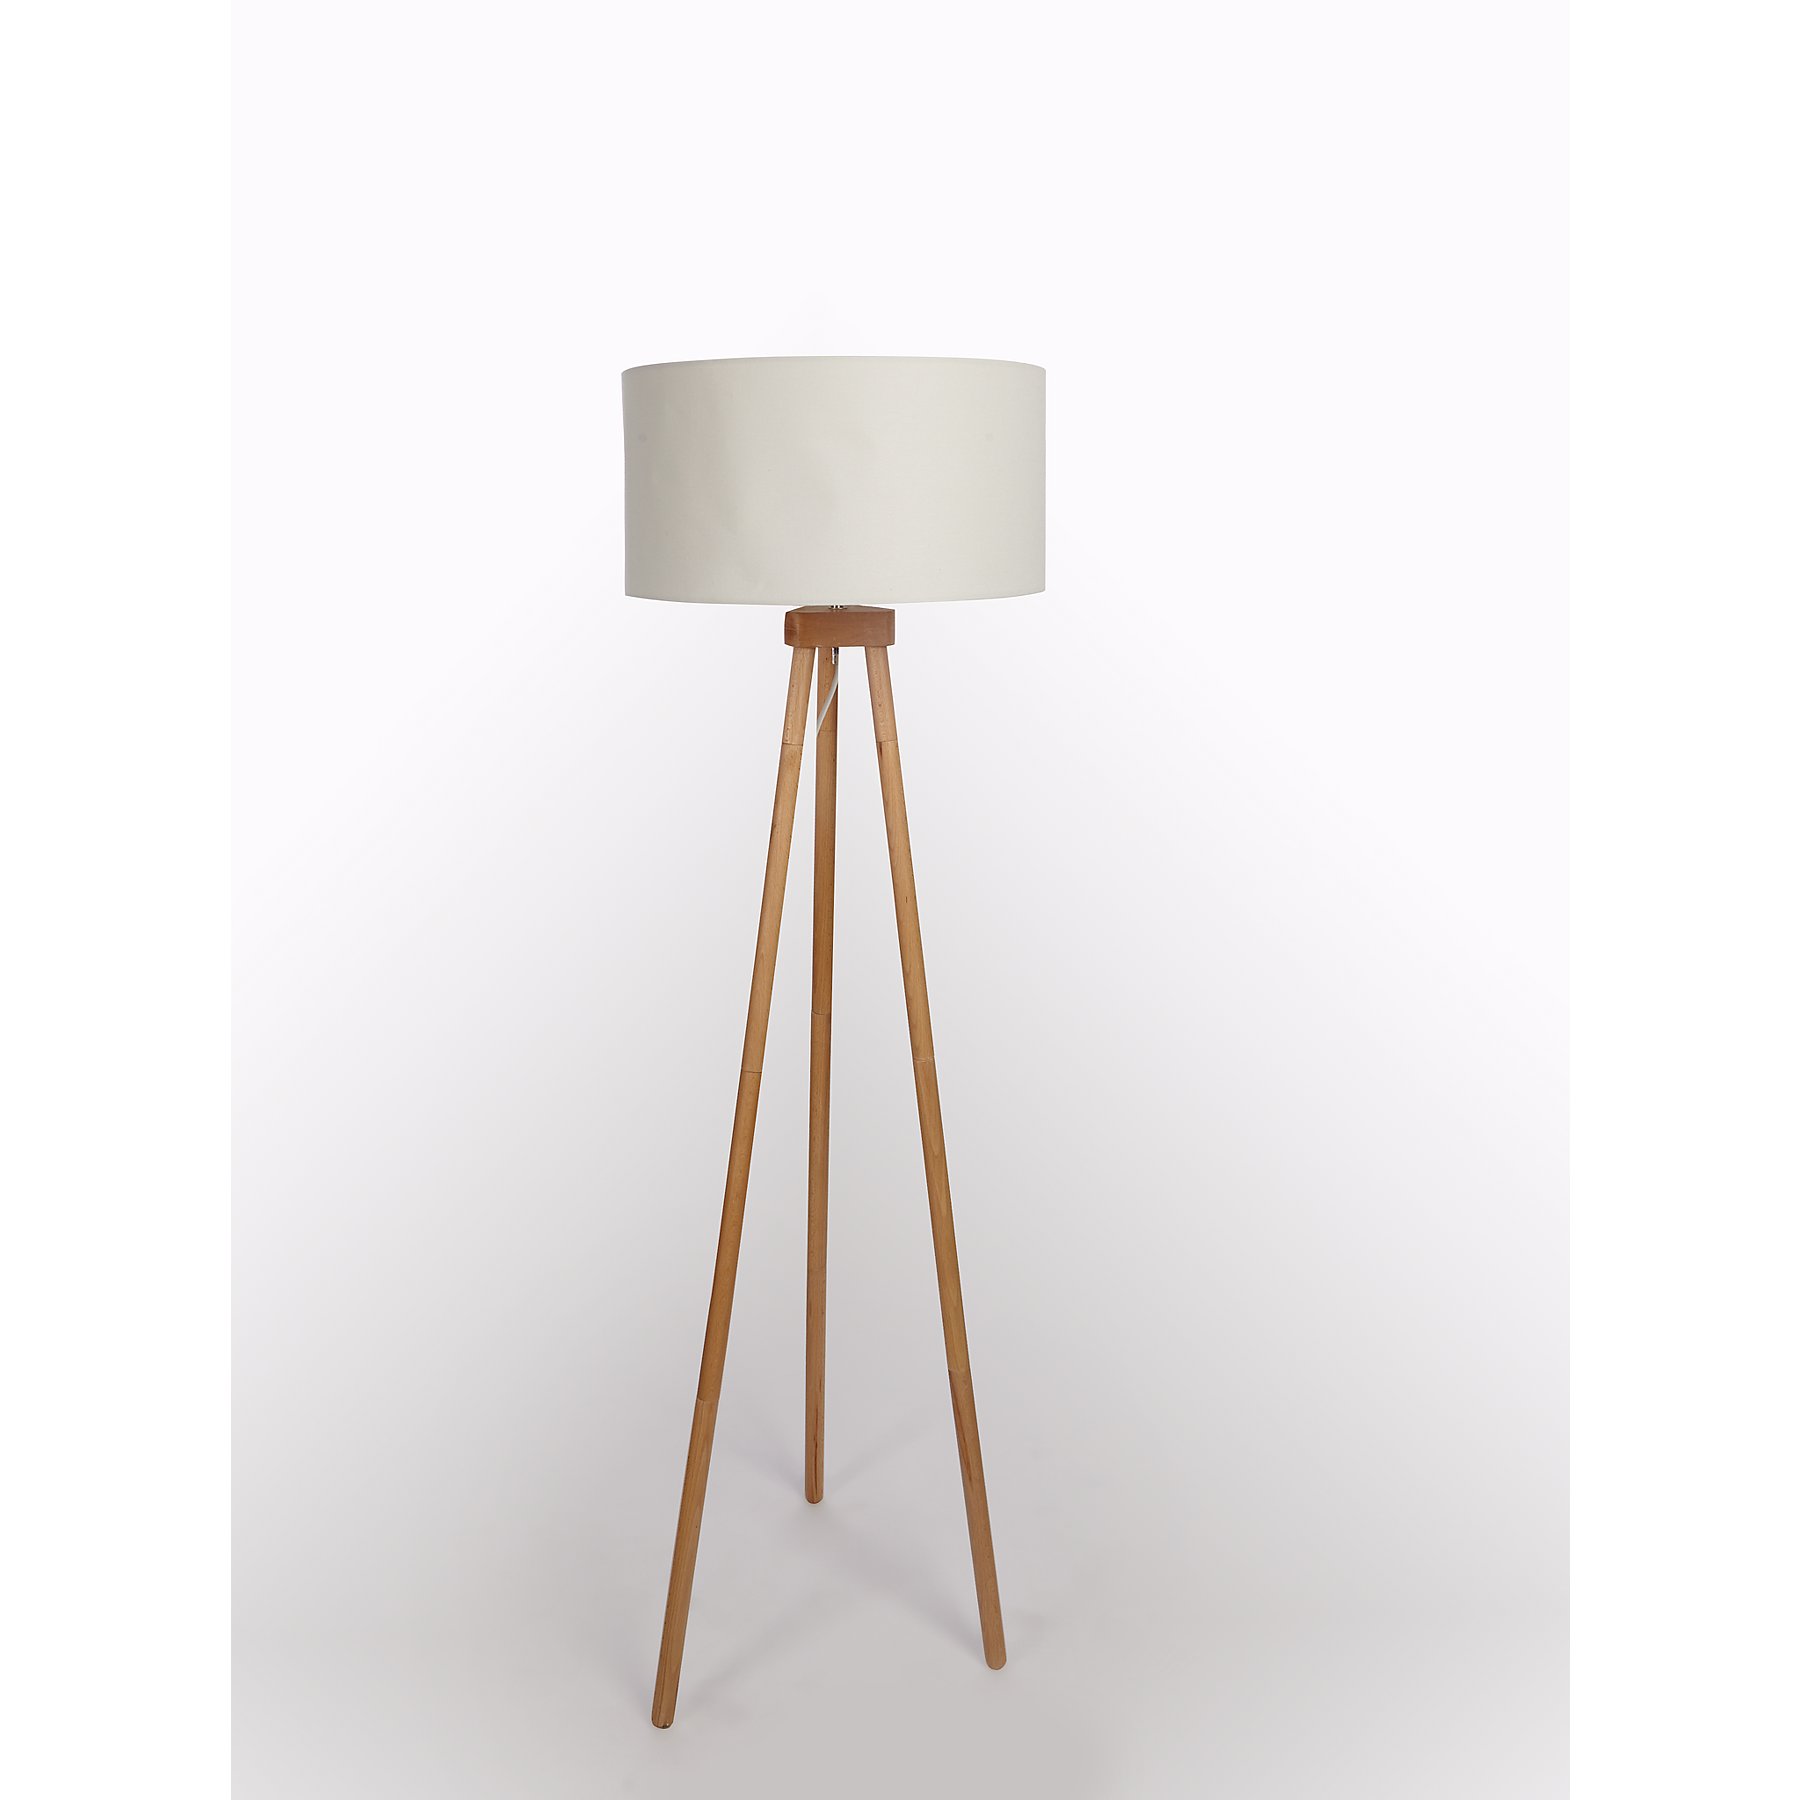 Cream Wooden Tripod Floor Lamp Home, Wooden Tripod Lamp Stand